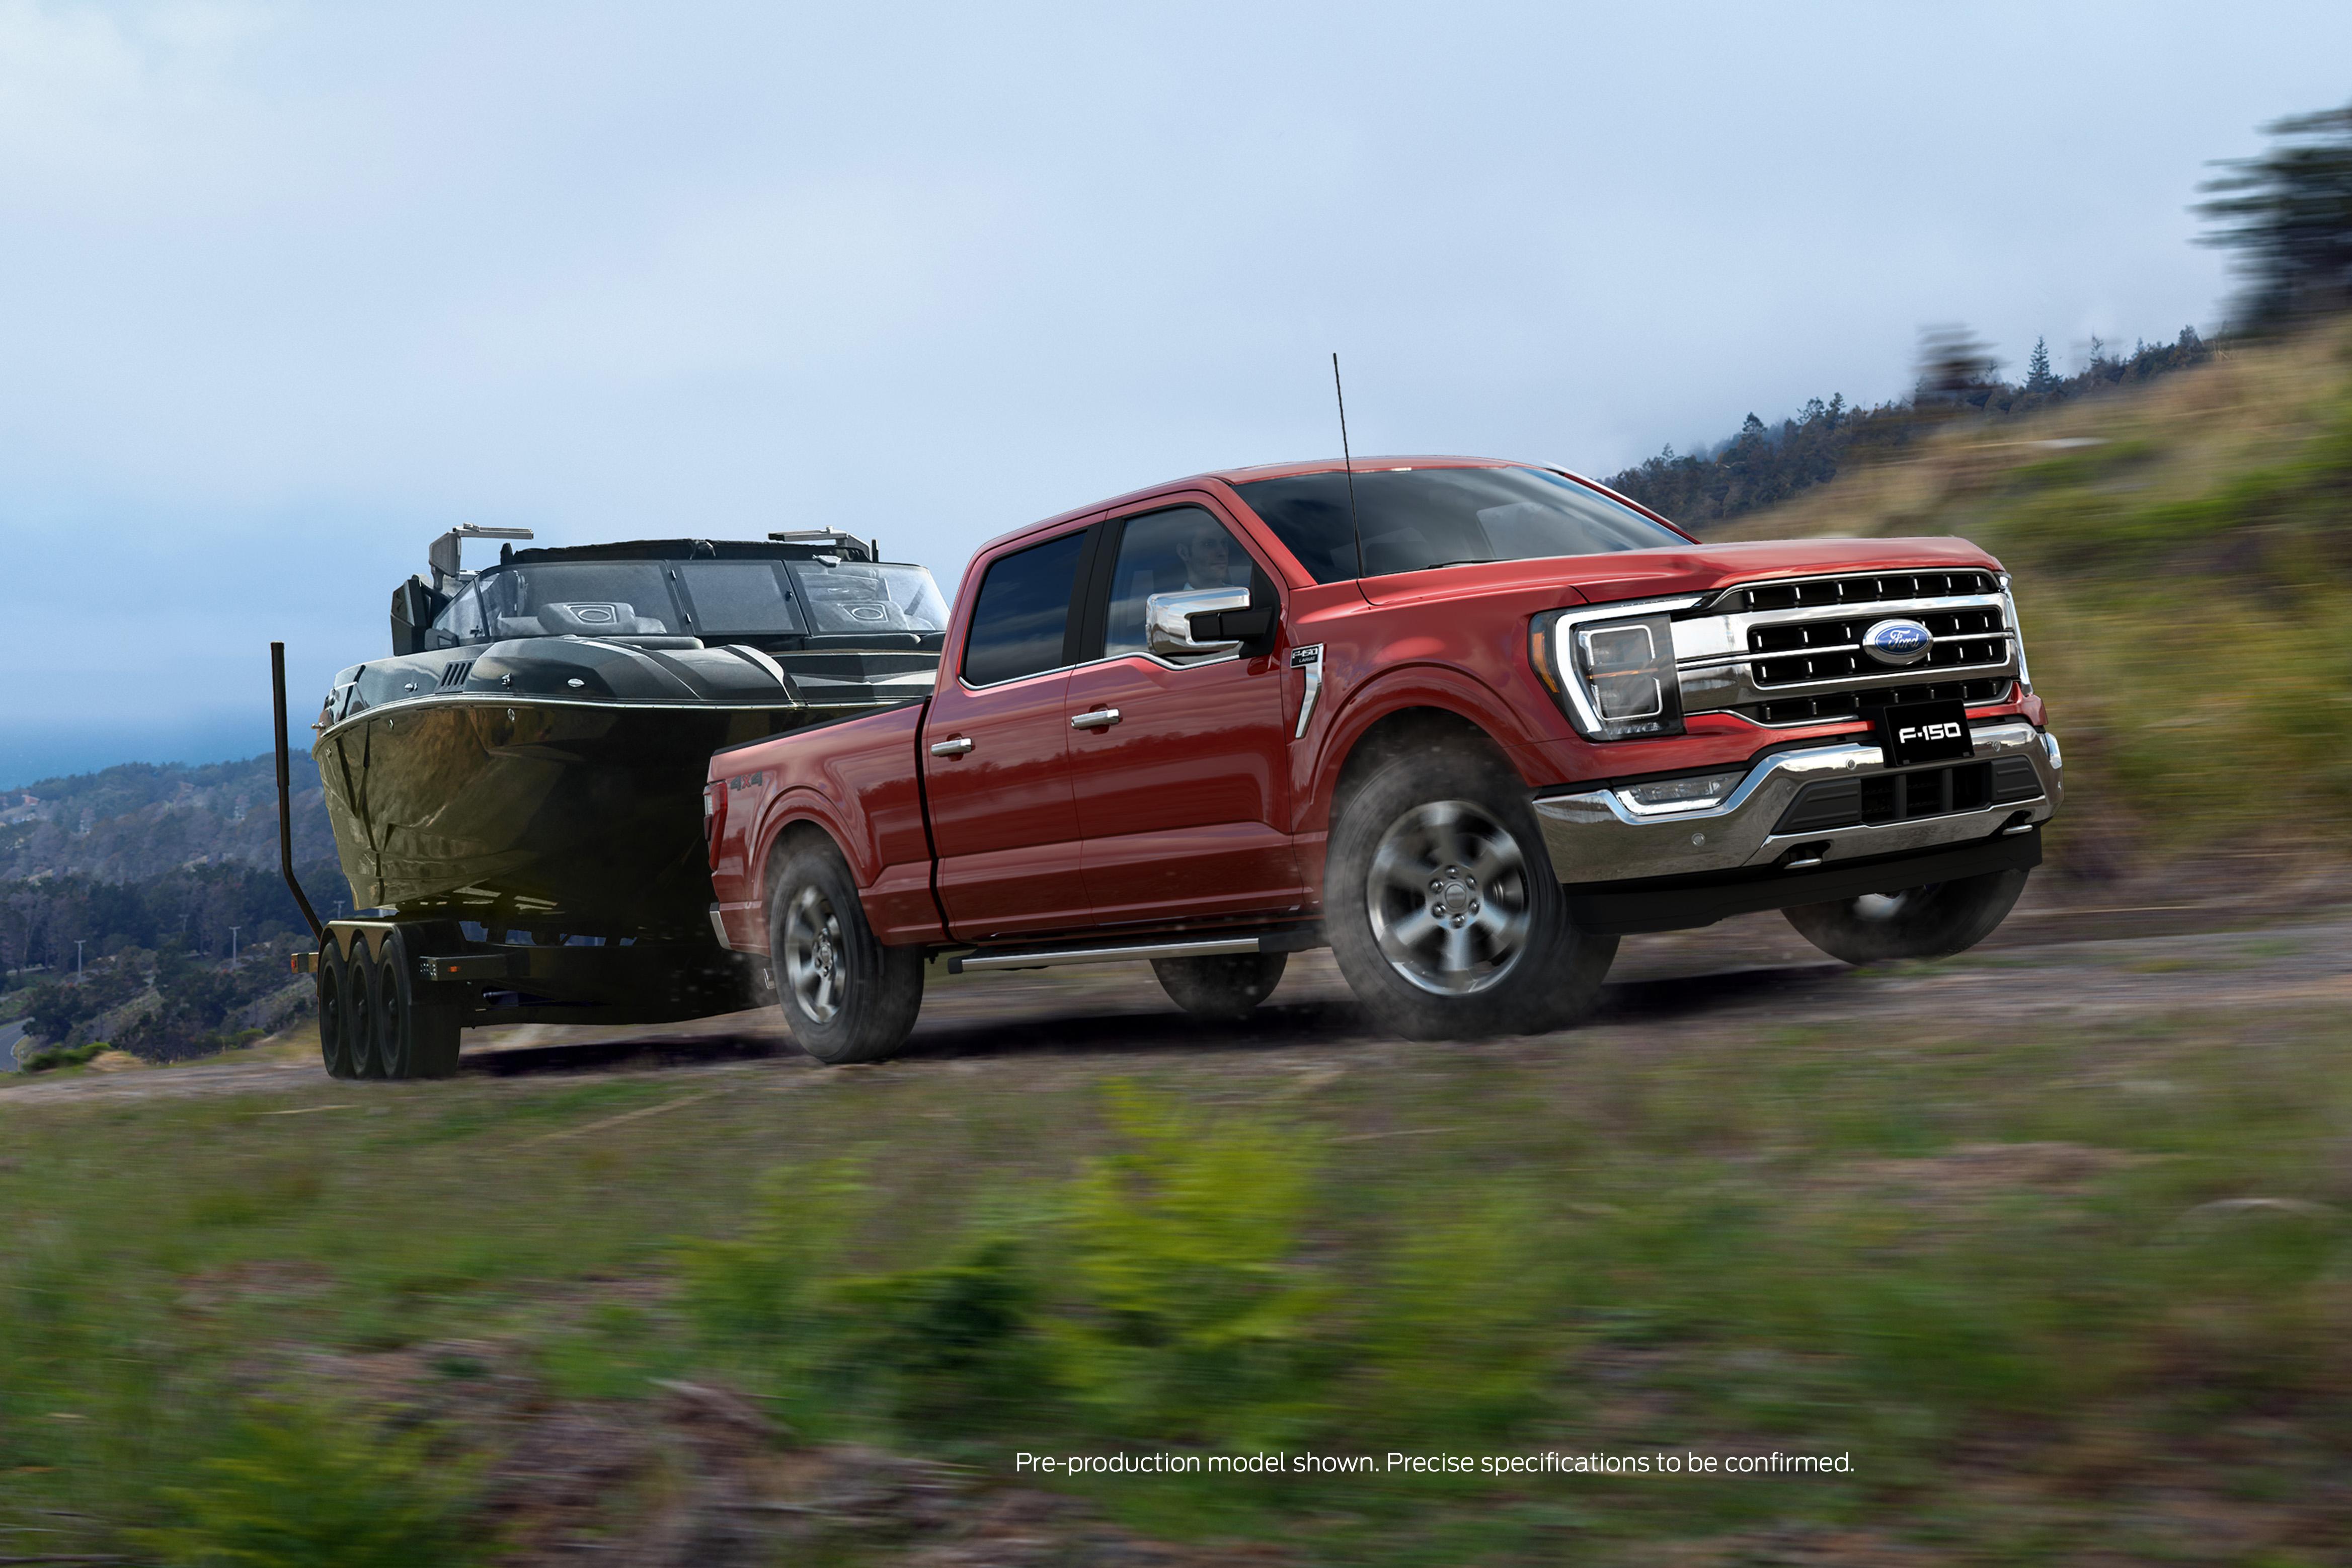 The options we'd like to see on the 2023 Ford F-150